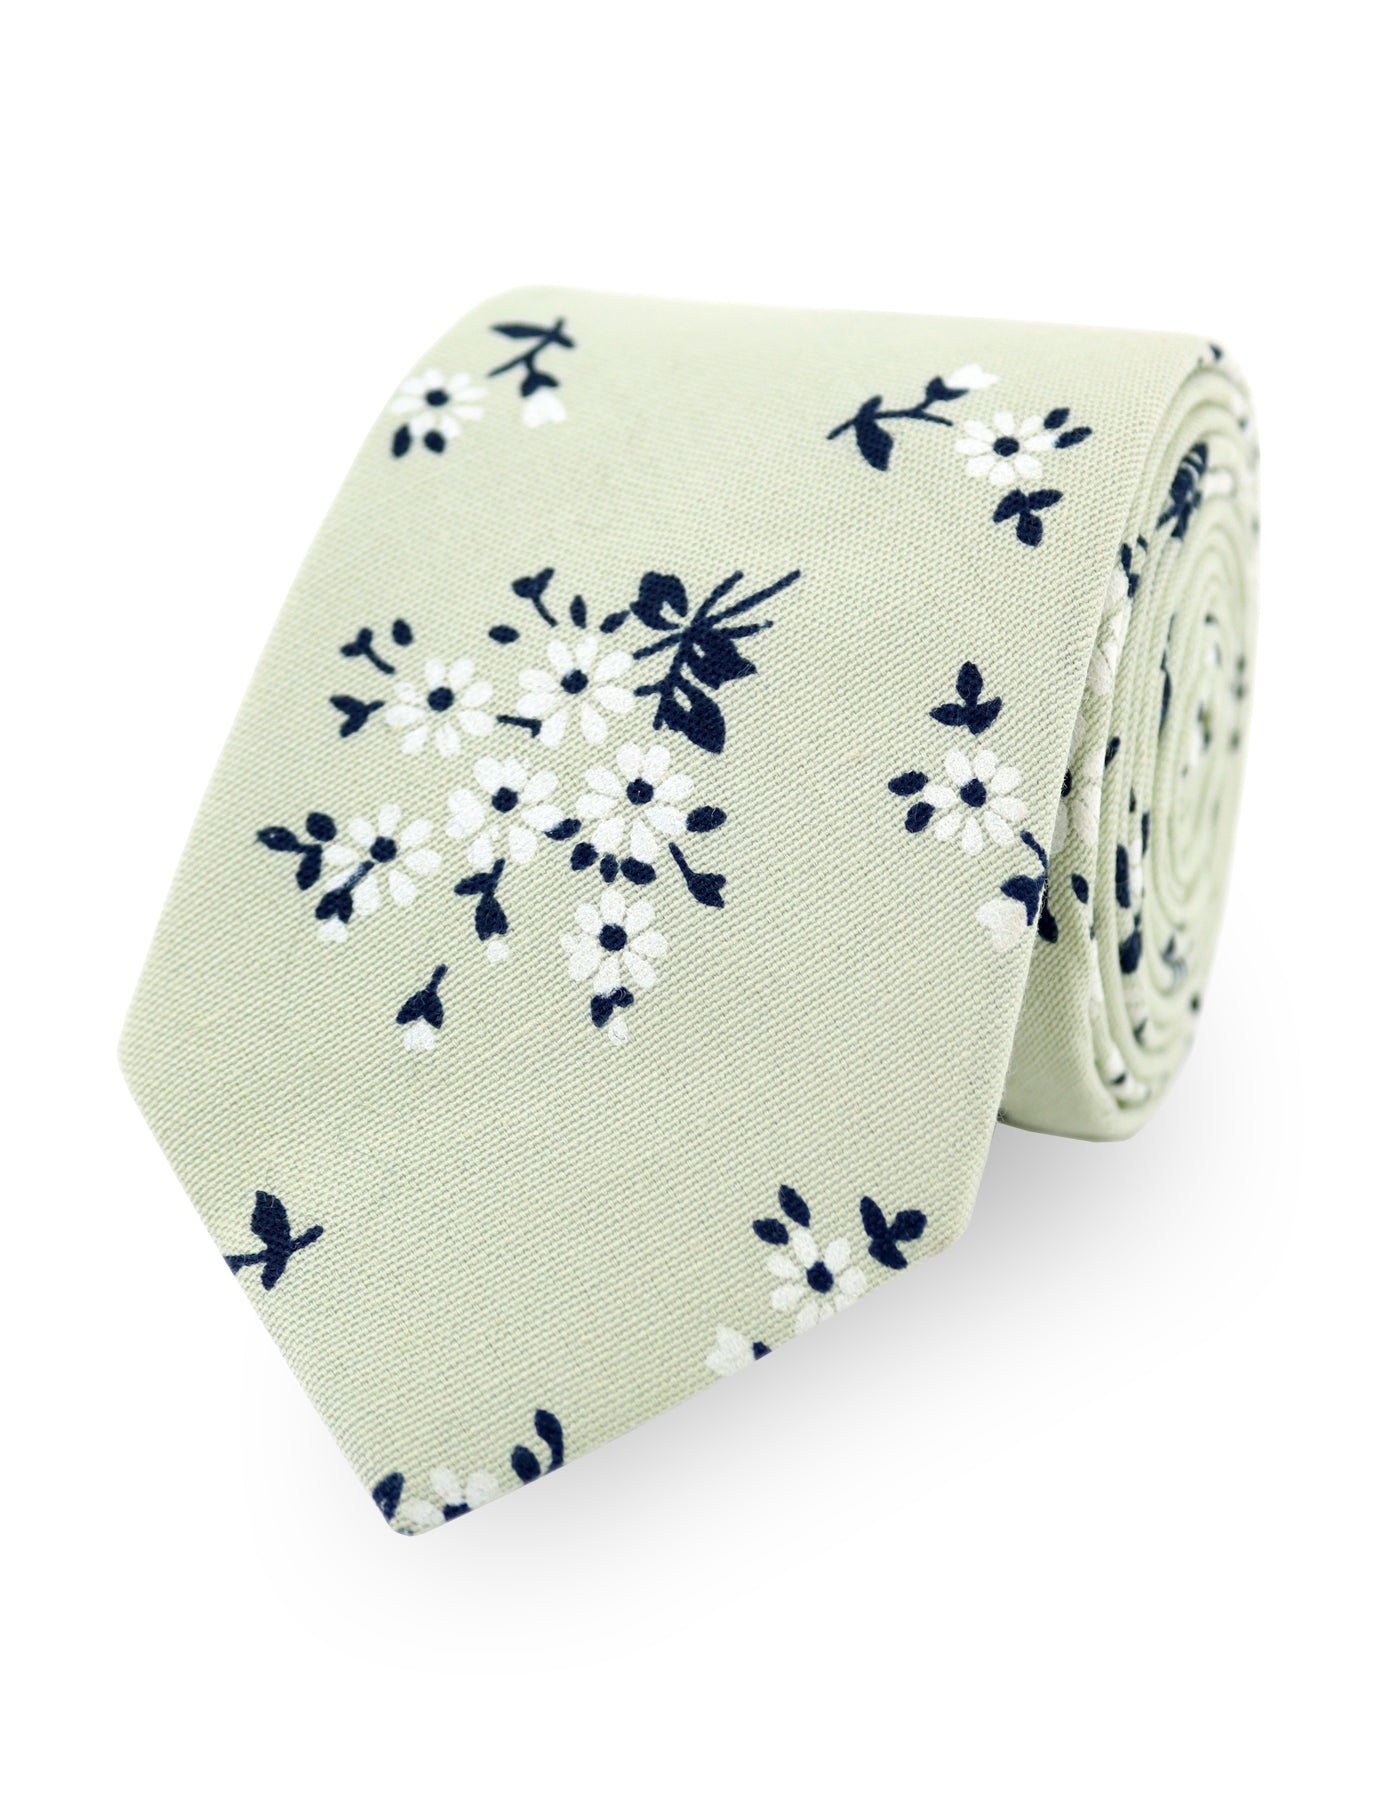 100% Cotton Floral Print Bow Tie - Green & Navy